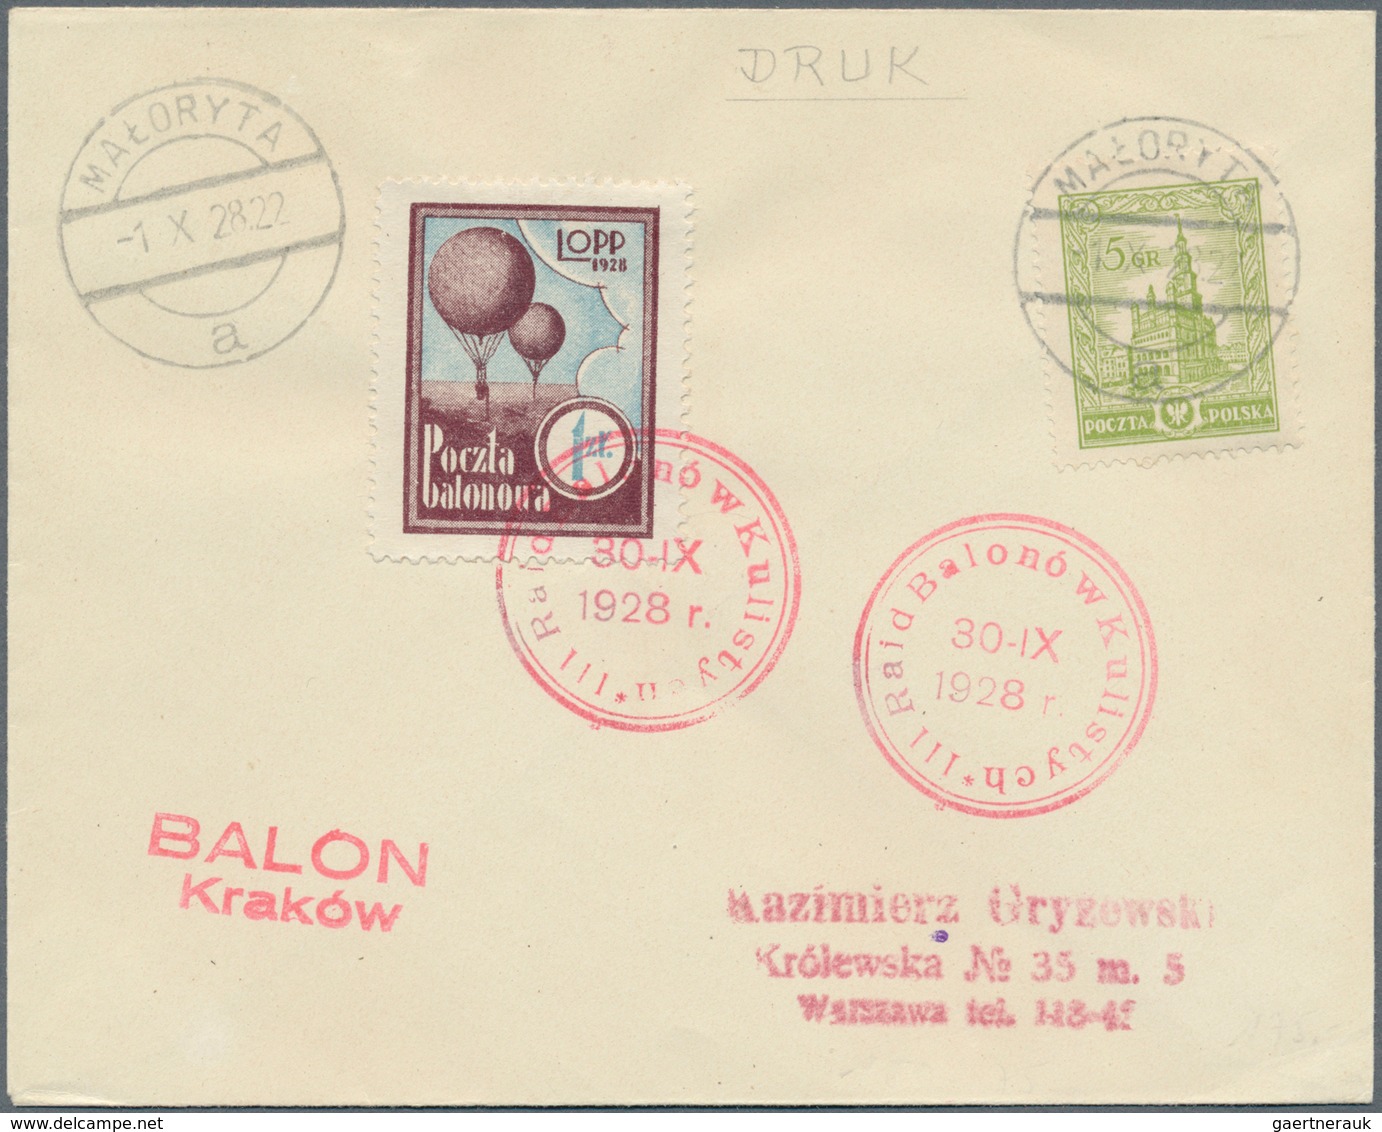 Ballonpost: 1928, 30.IX., Poland, Balloon "Kraków", Two Covers With Perforated And Imperforate Vigne - Fesselballons